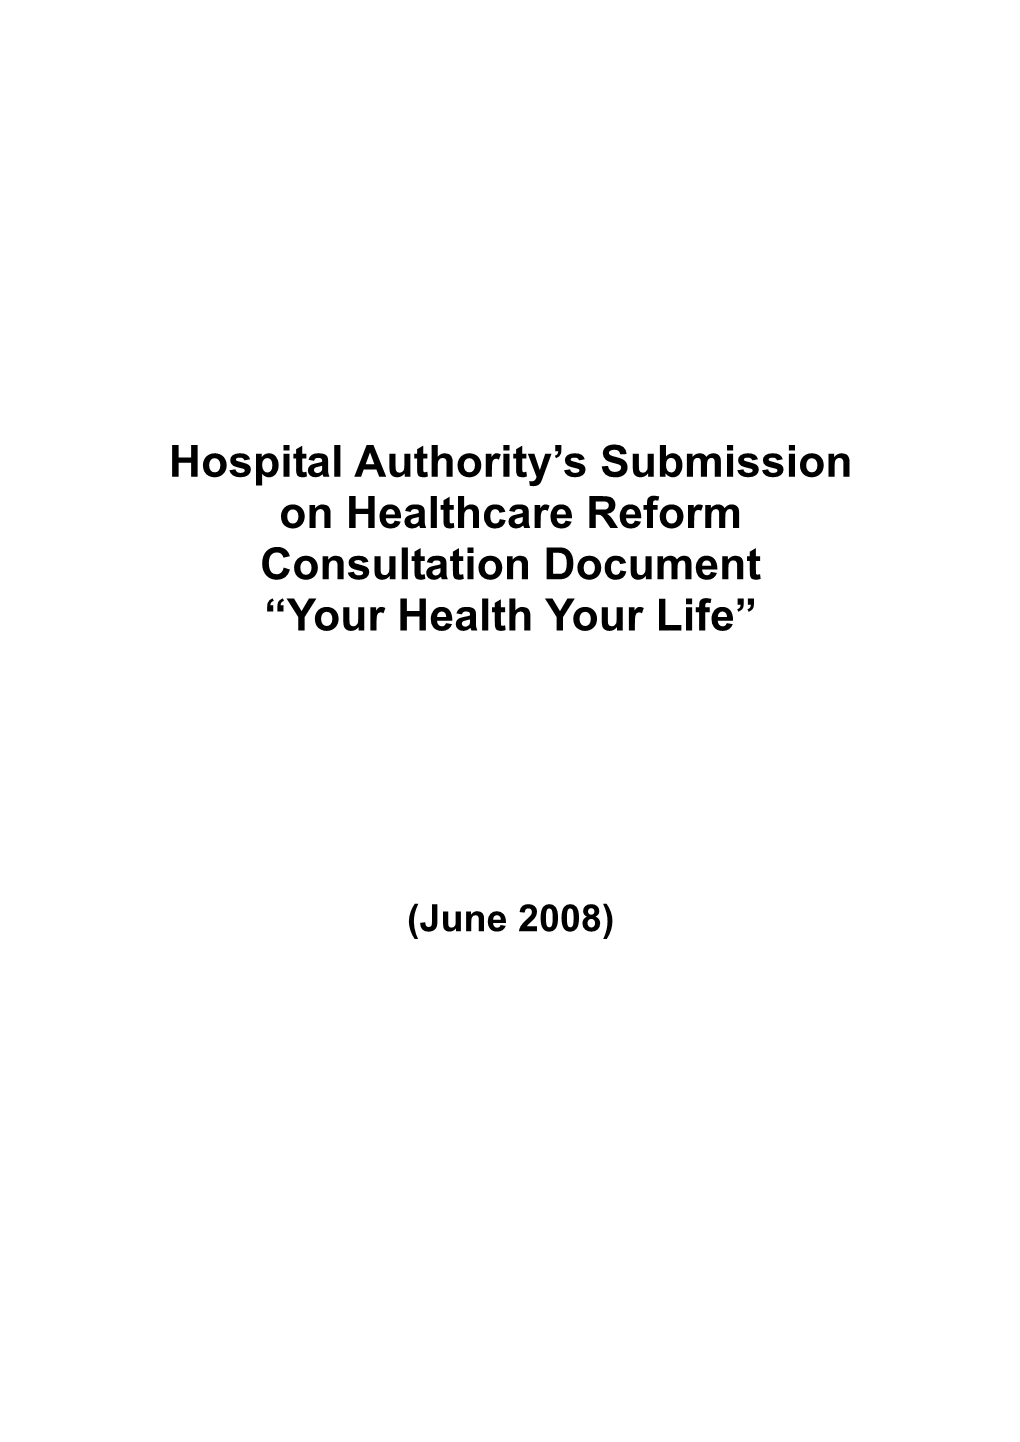 Hospital Authority’S Submission on Healthcare Reform Consultation Document “Your Health Your Life”